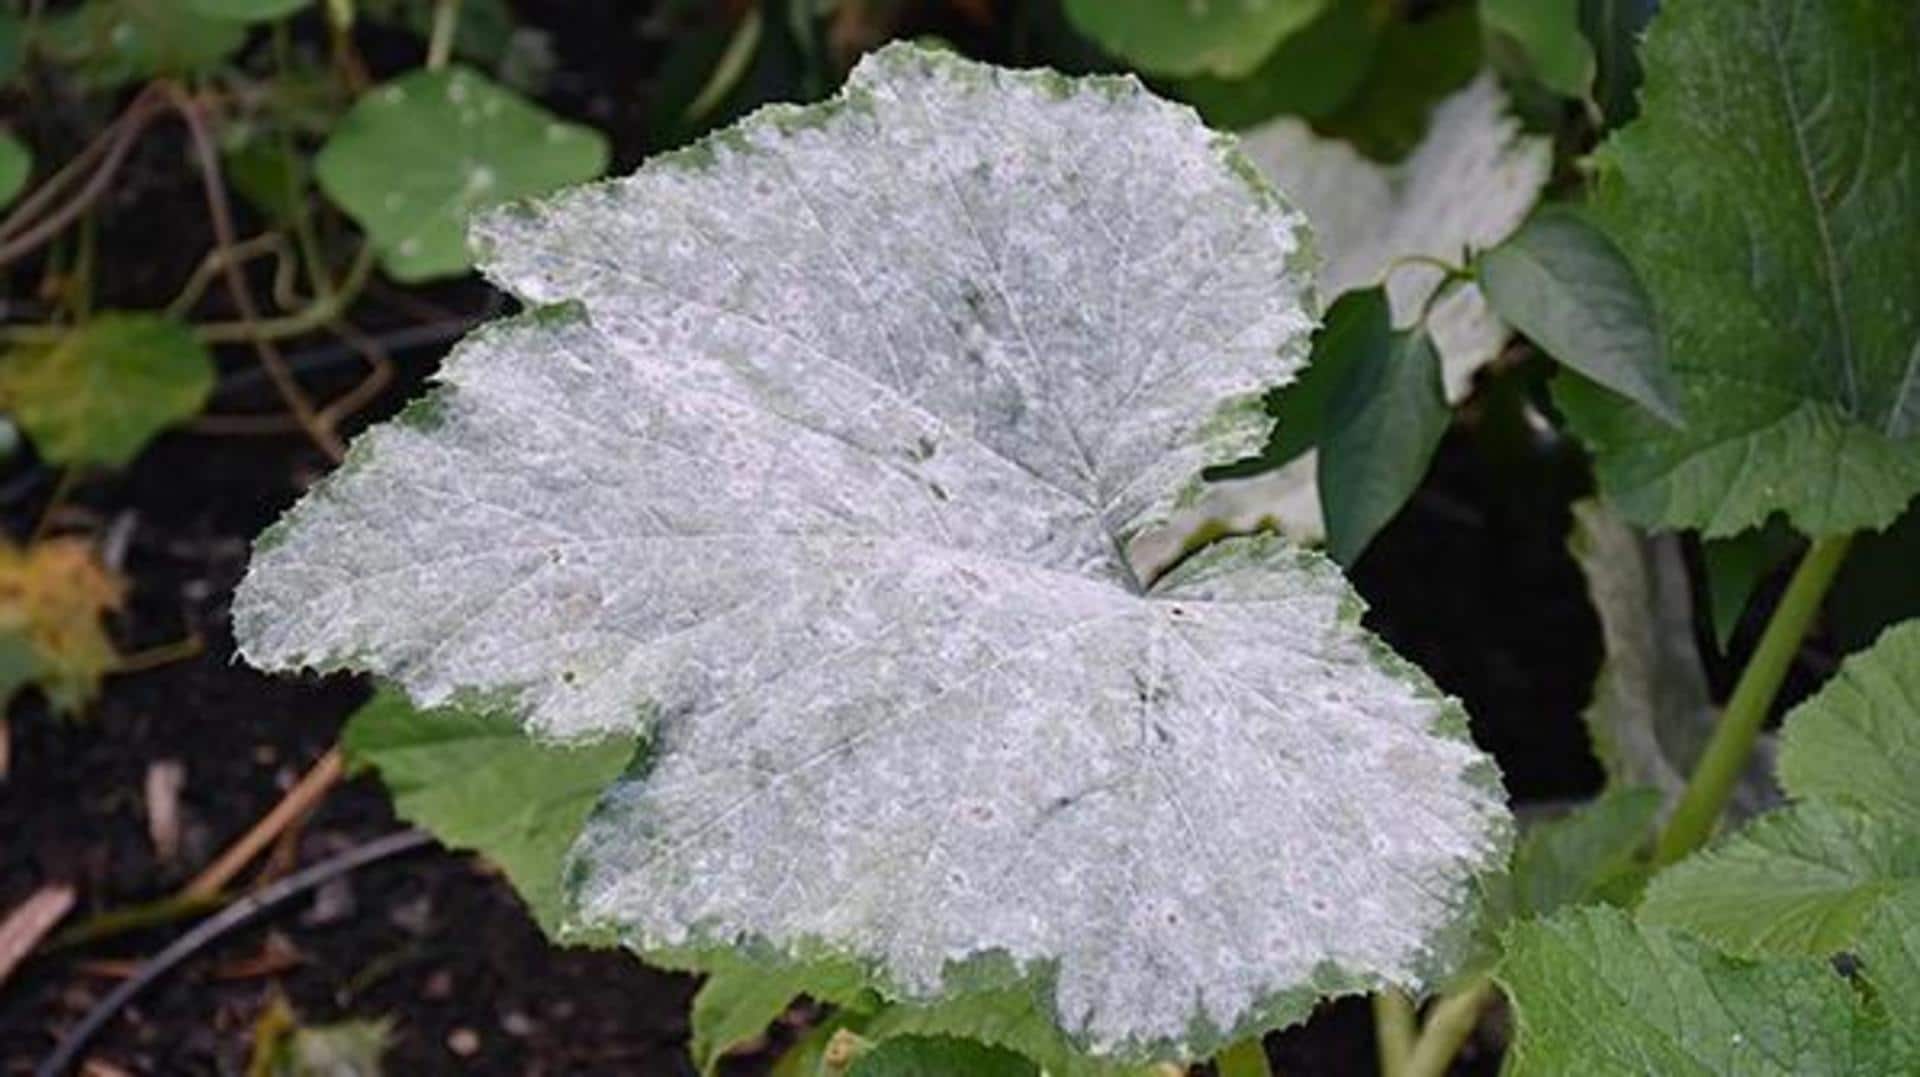 All about powdery mildew: Symptoms and prevention